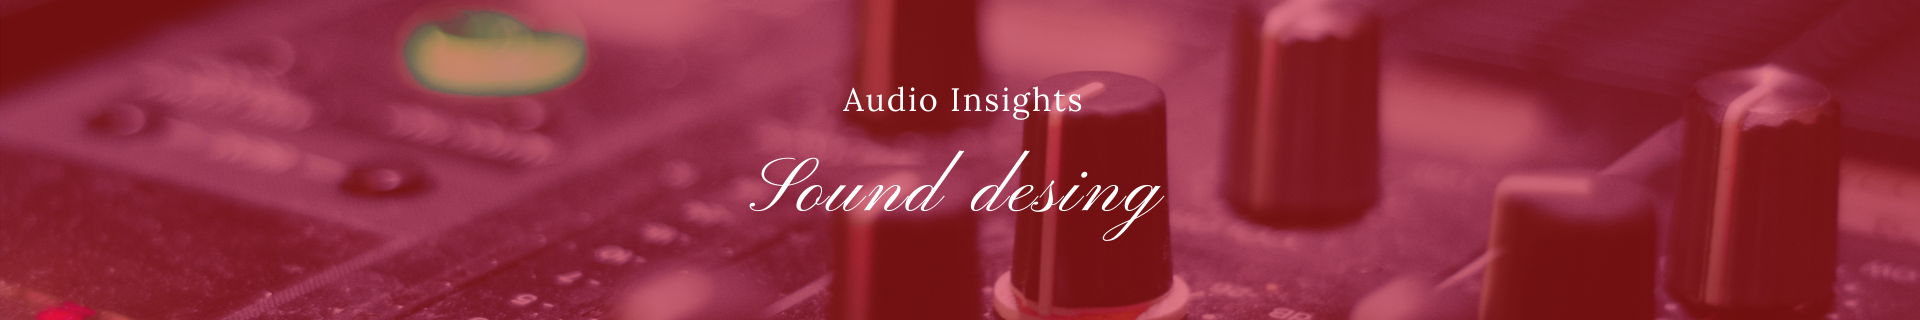 AudioInsights profile cover